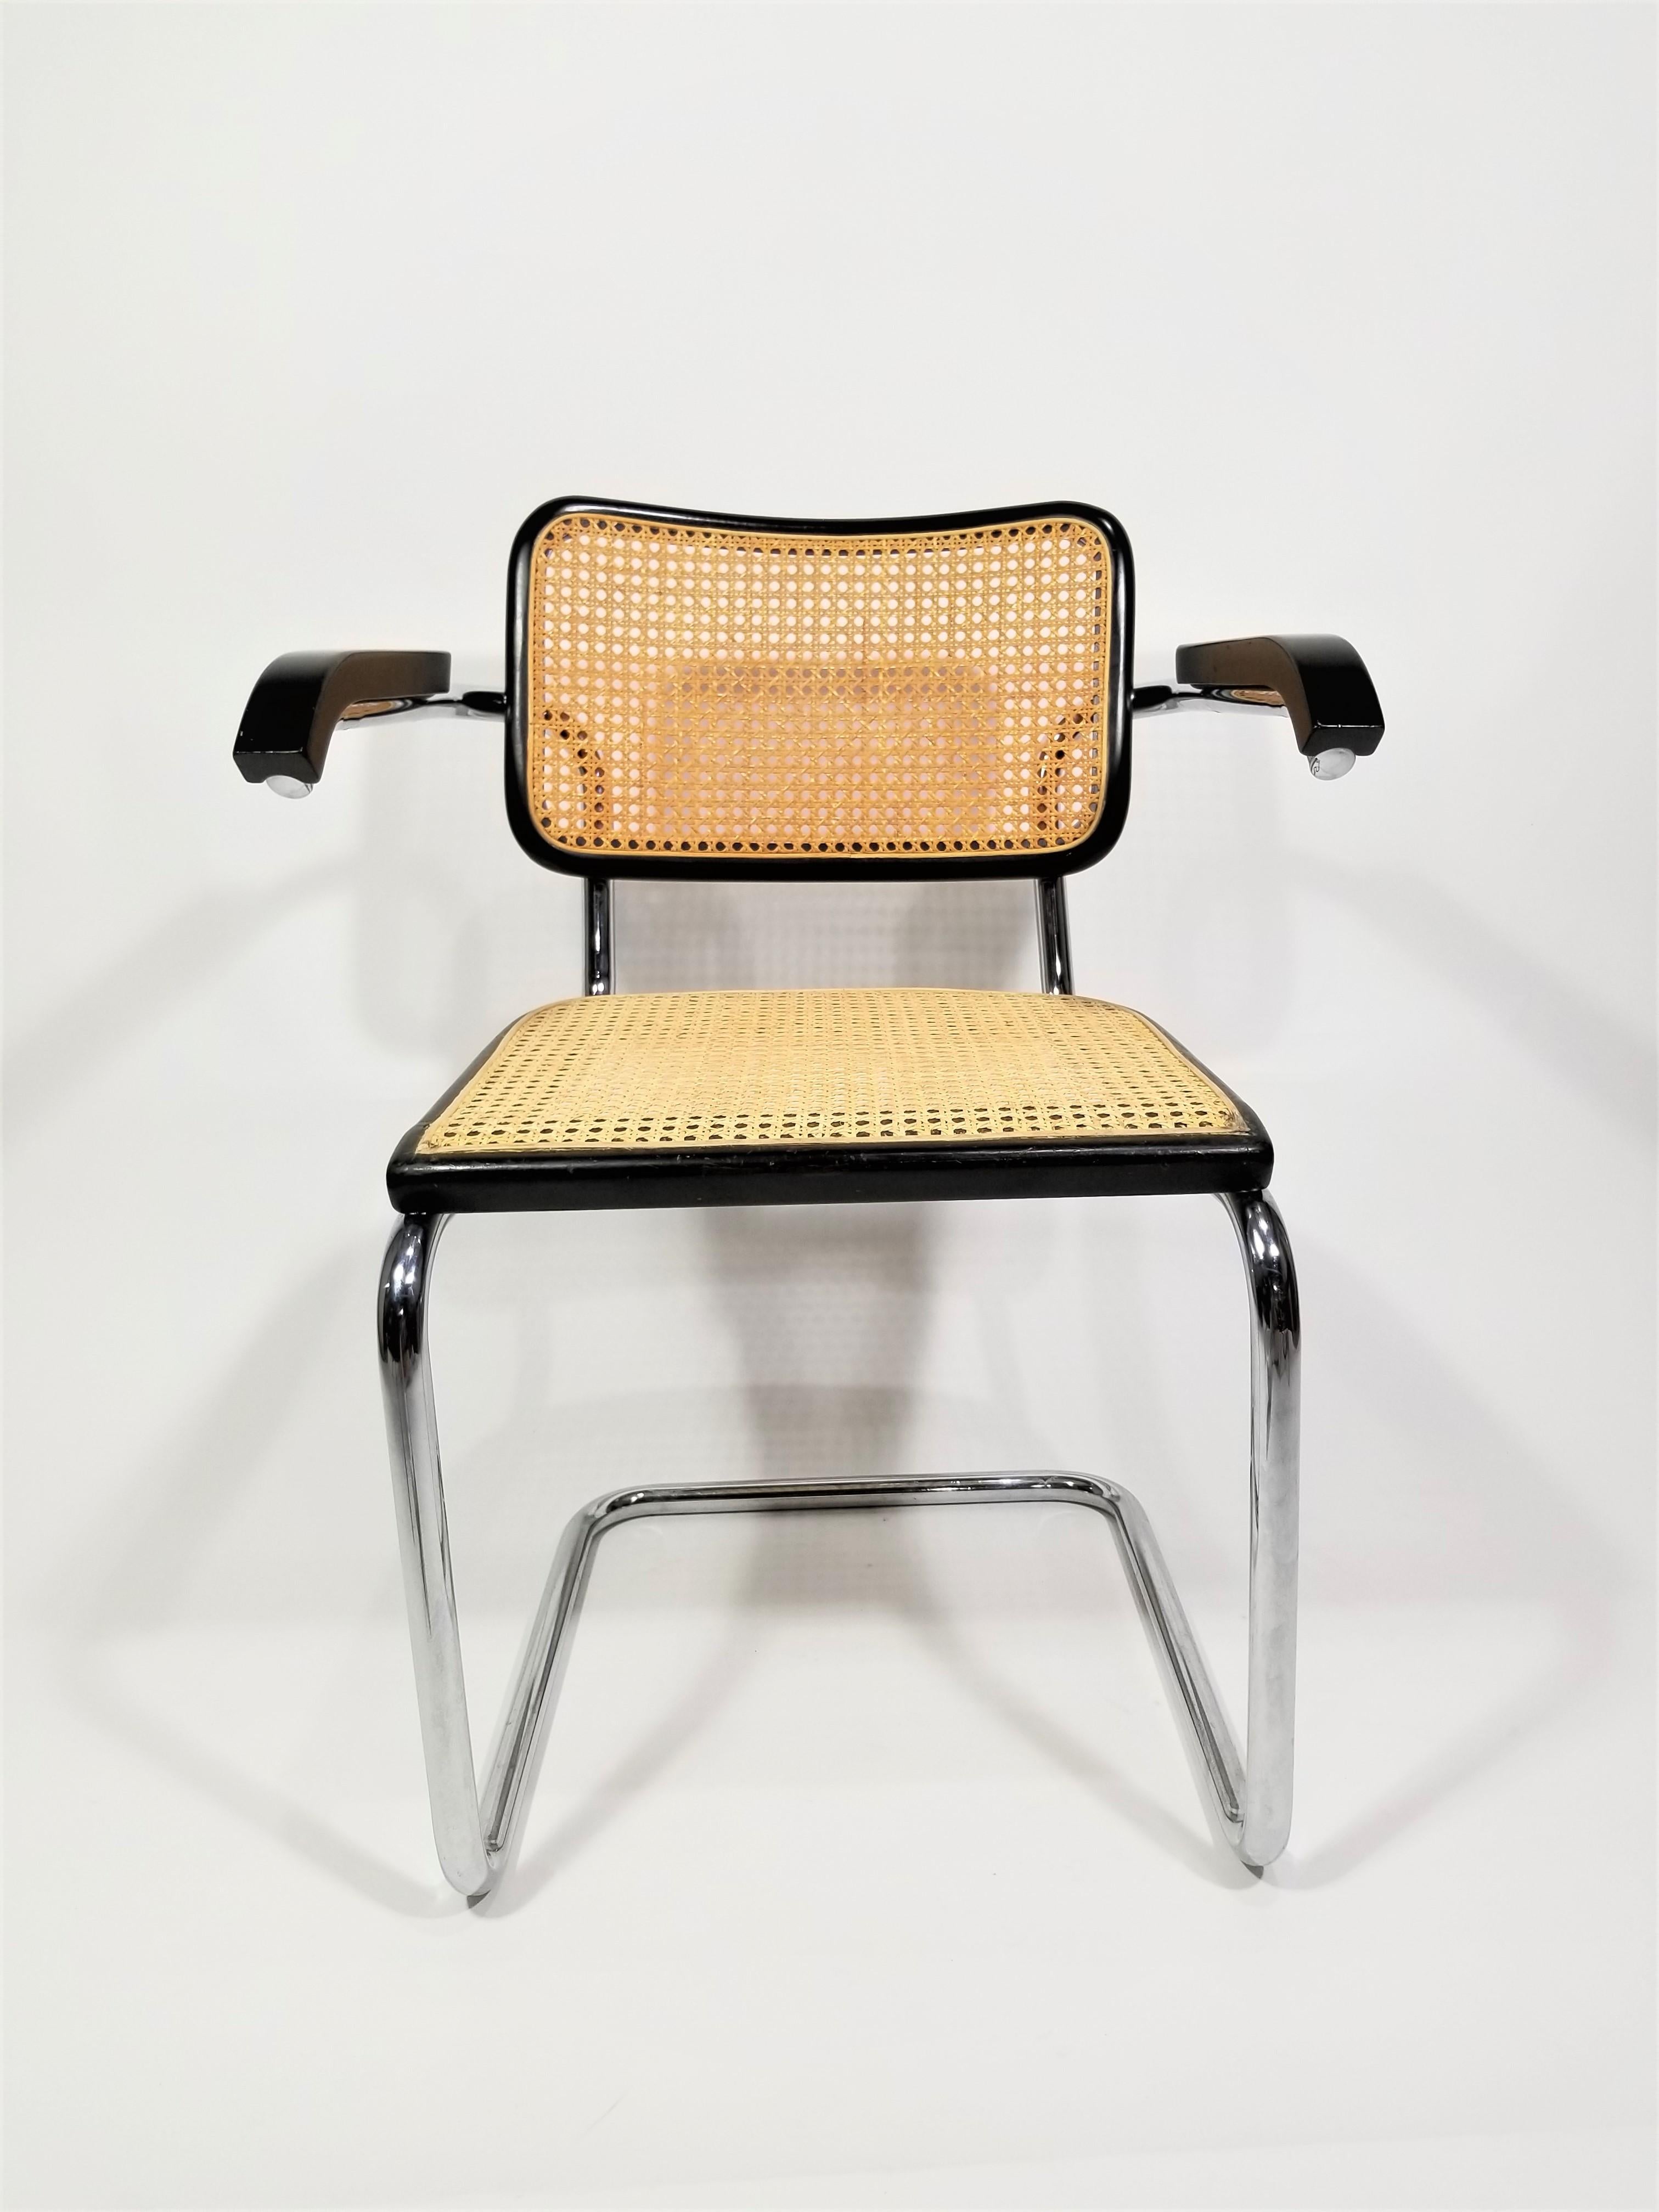 Mid century 1960s Marcel Breuer Cesca armchair. Black finish. Cane Back and Seat. Classic Chrome Cantilever Frame. We Polish Chrome. 

Complimentary Free local delivery can be arranged for this item in NYC and surrounding areas.